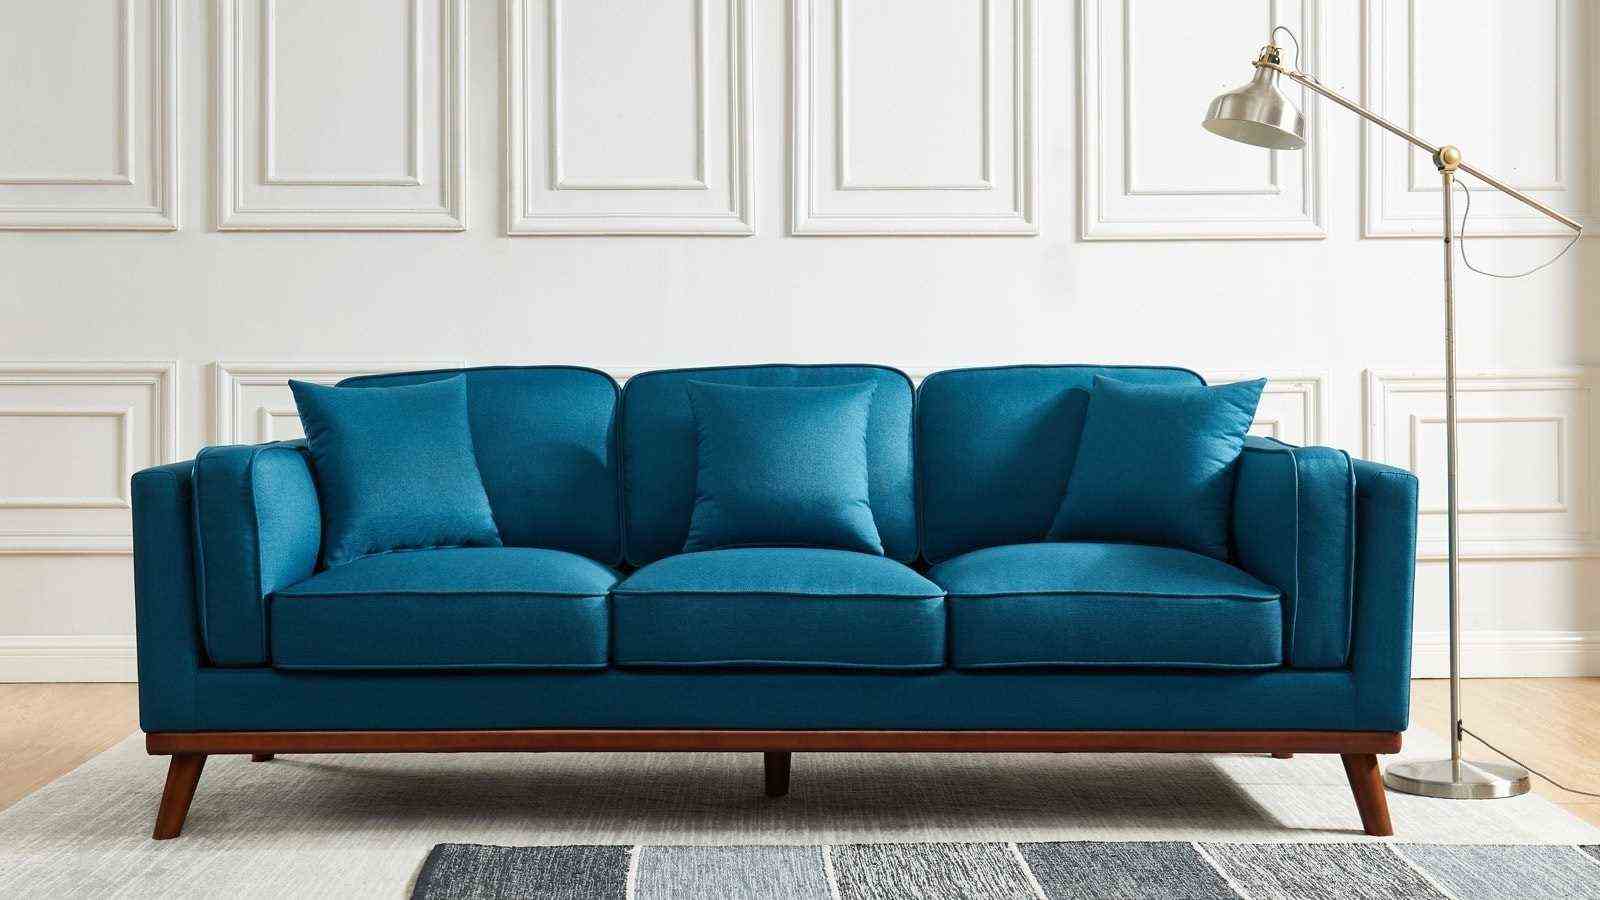   Duck Blue Sofa And Color Combinations 